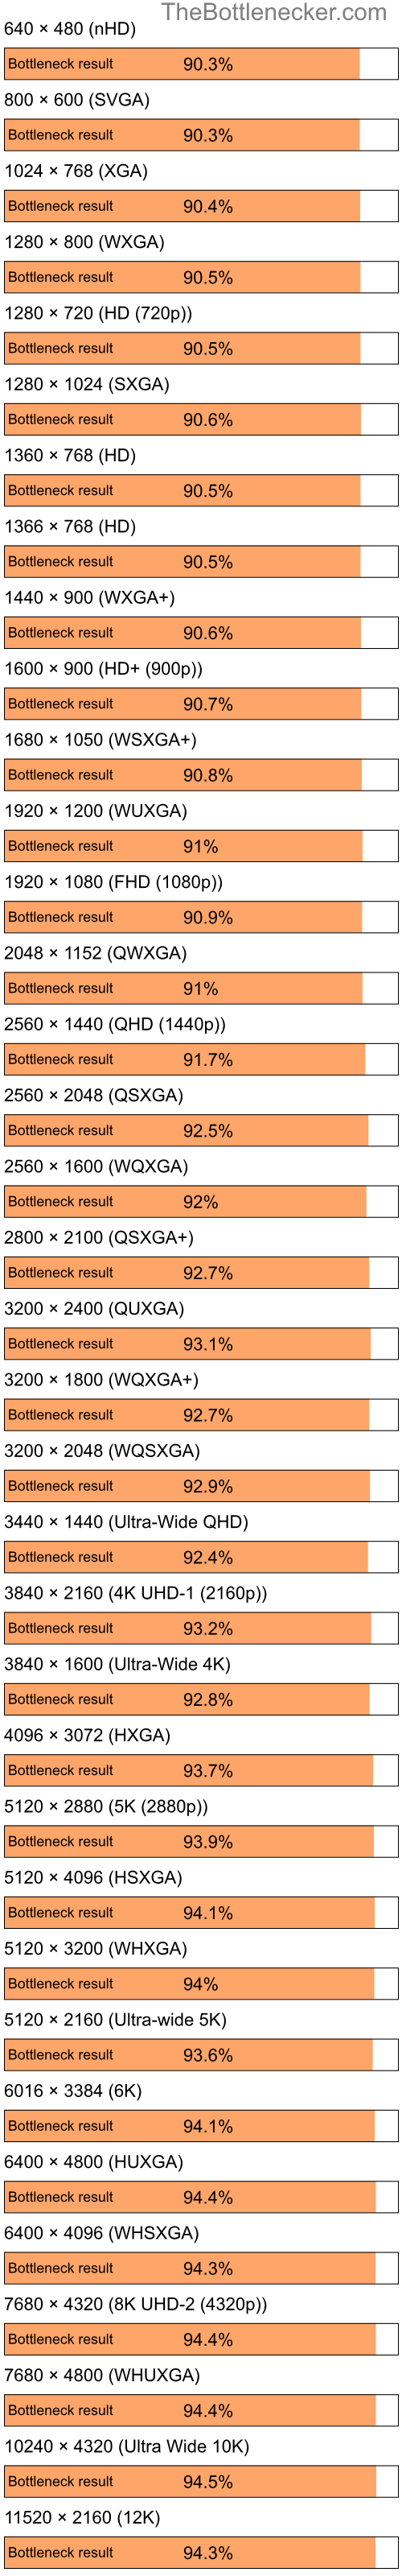 Bottleneck results by resolution for Intel Celeron and NVIDIA GeForce4 Ti 4600 in Graphic Card Intense Tasks